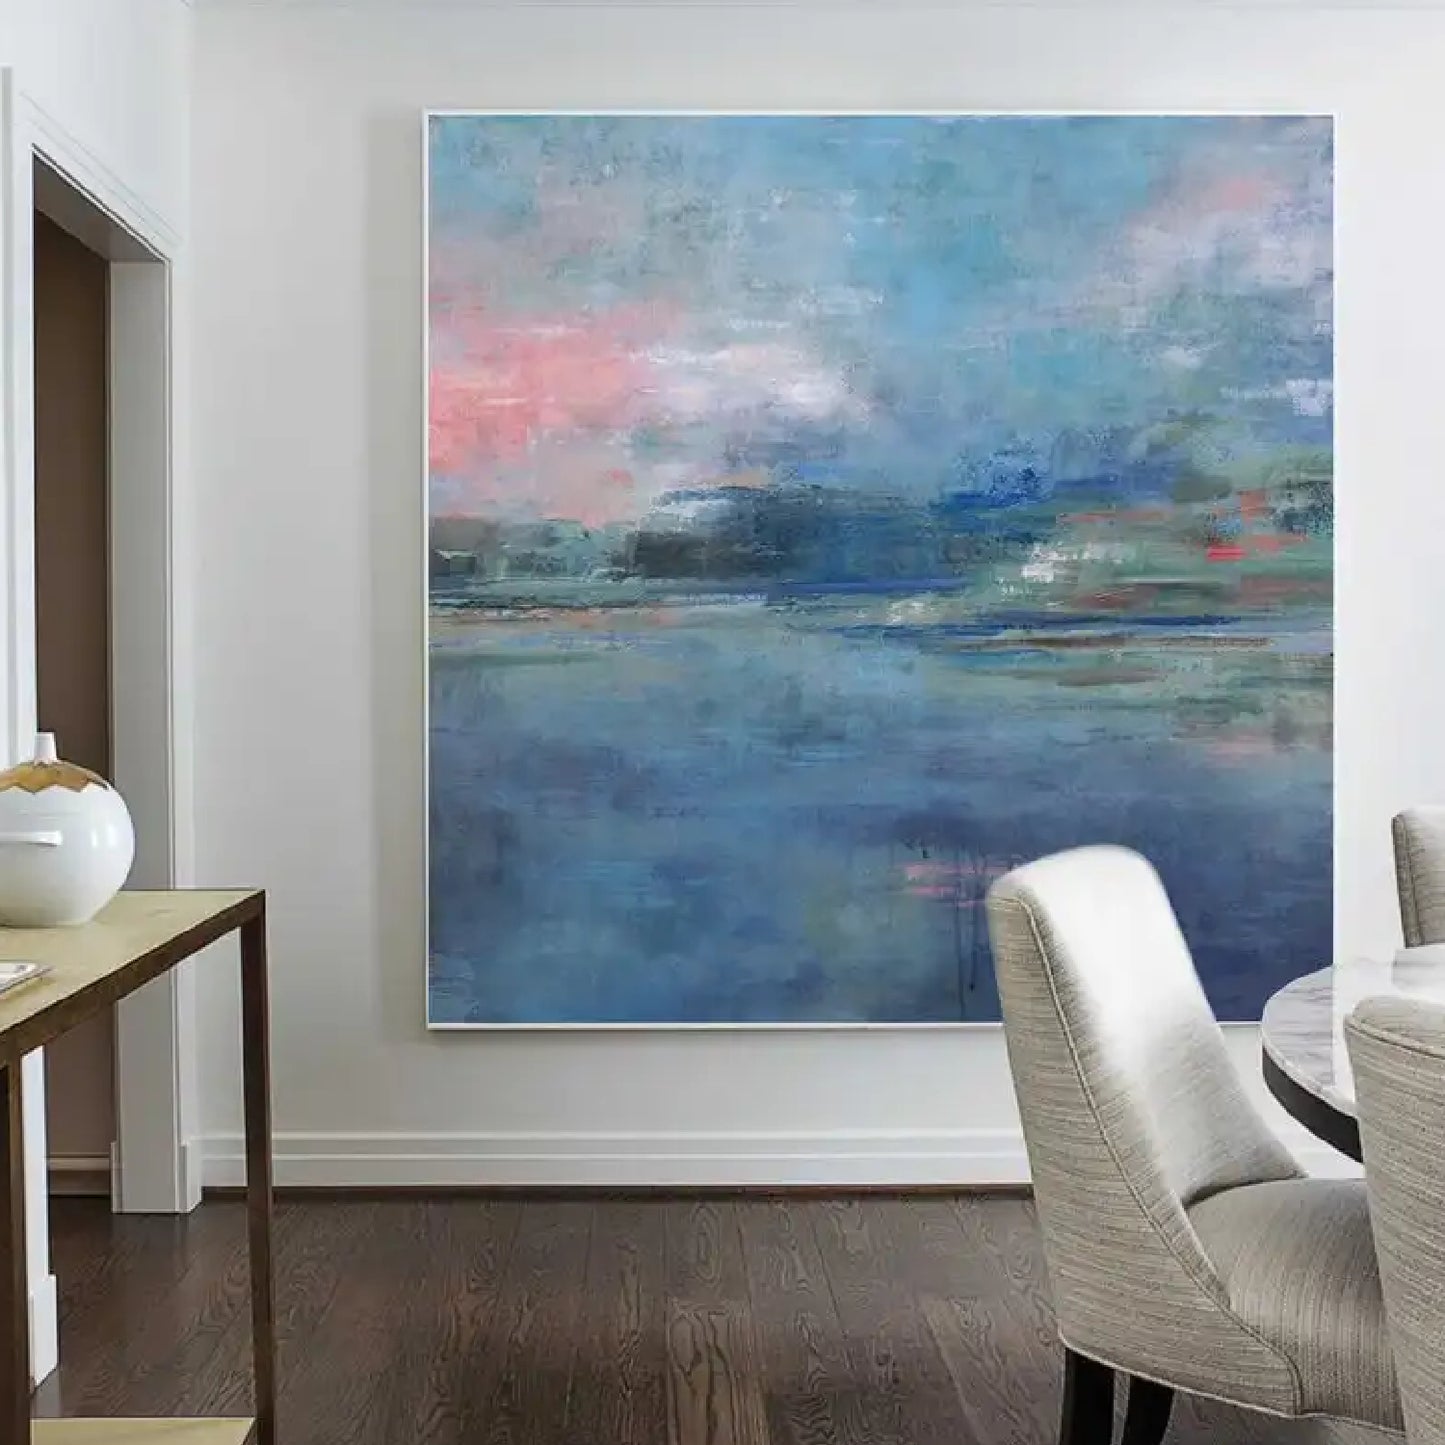 Large Abstract Blue Ocean Landscape Wall Art